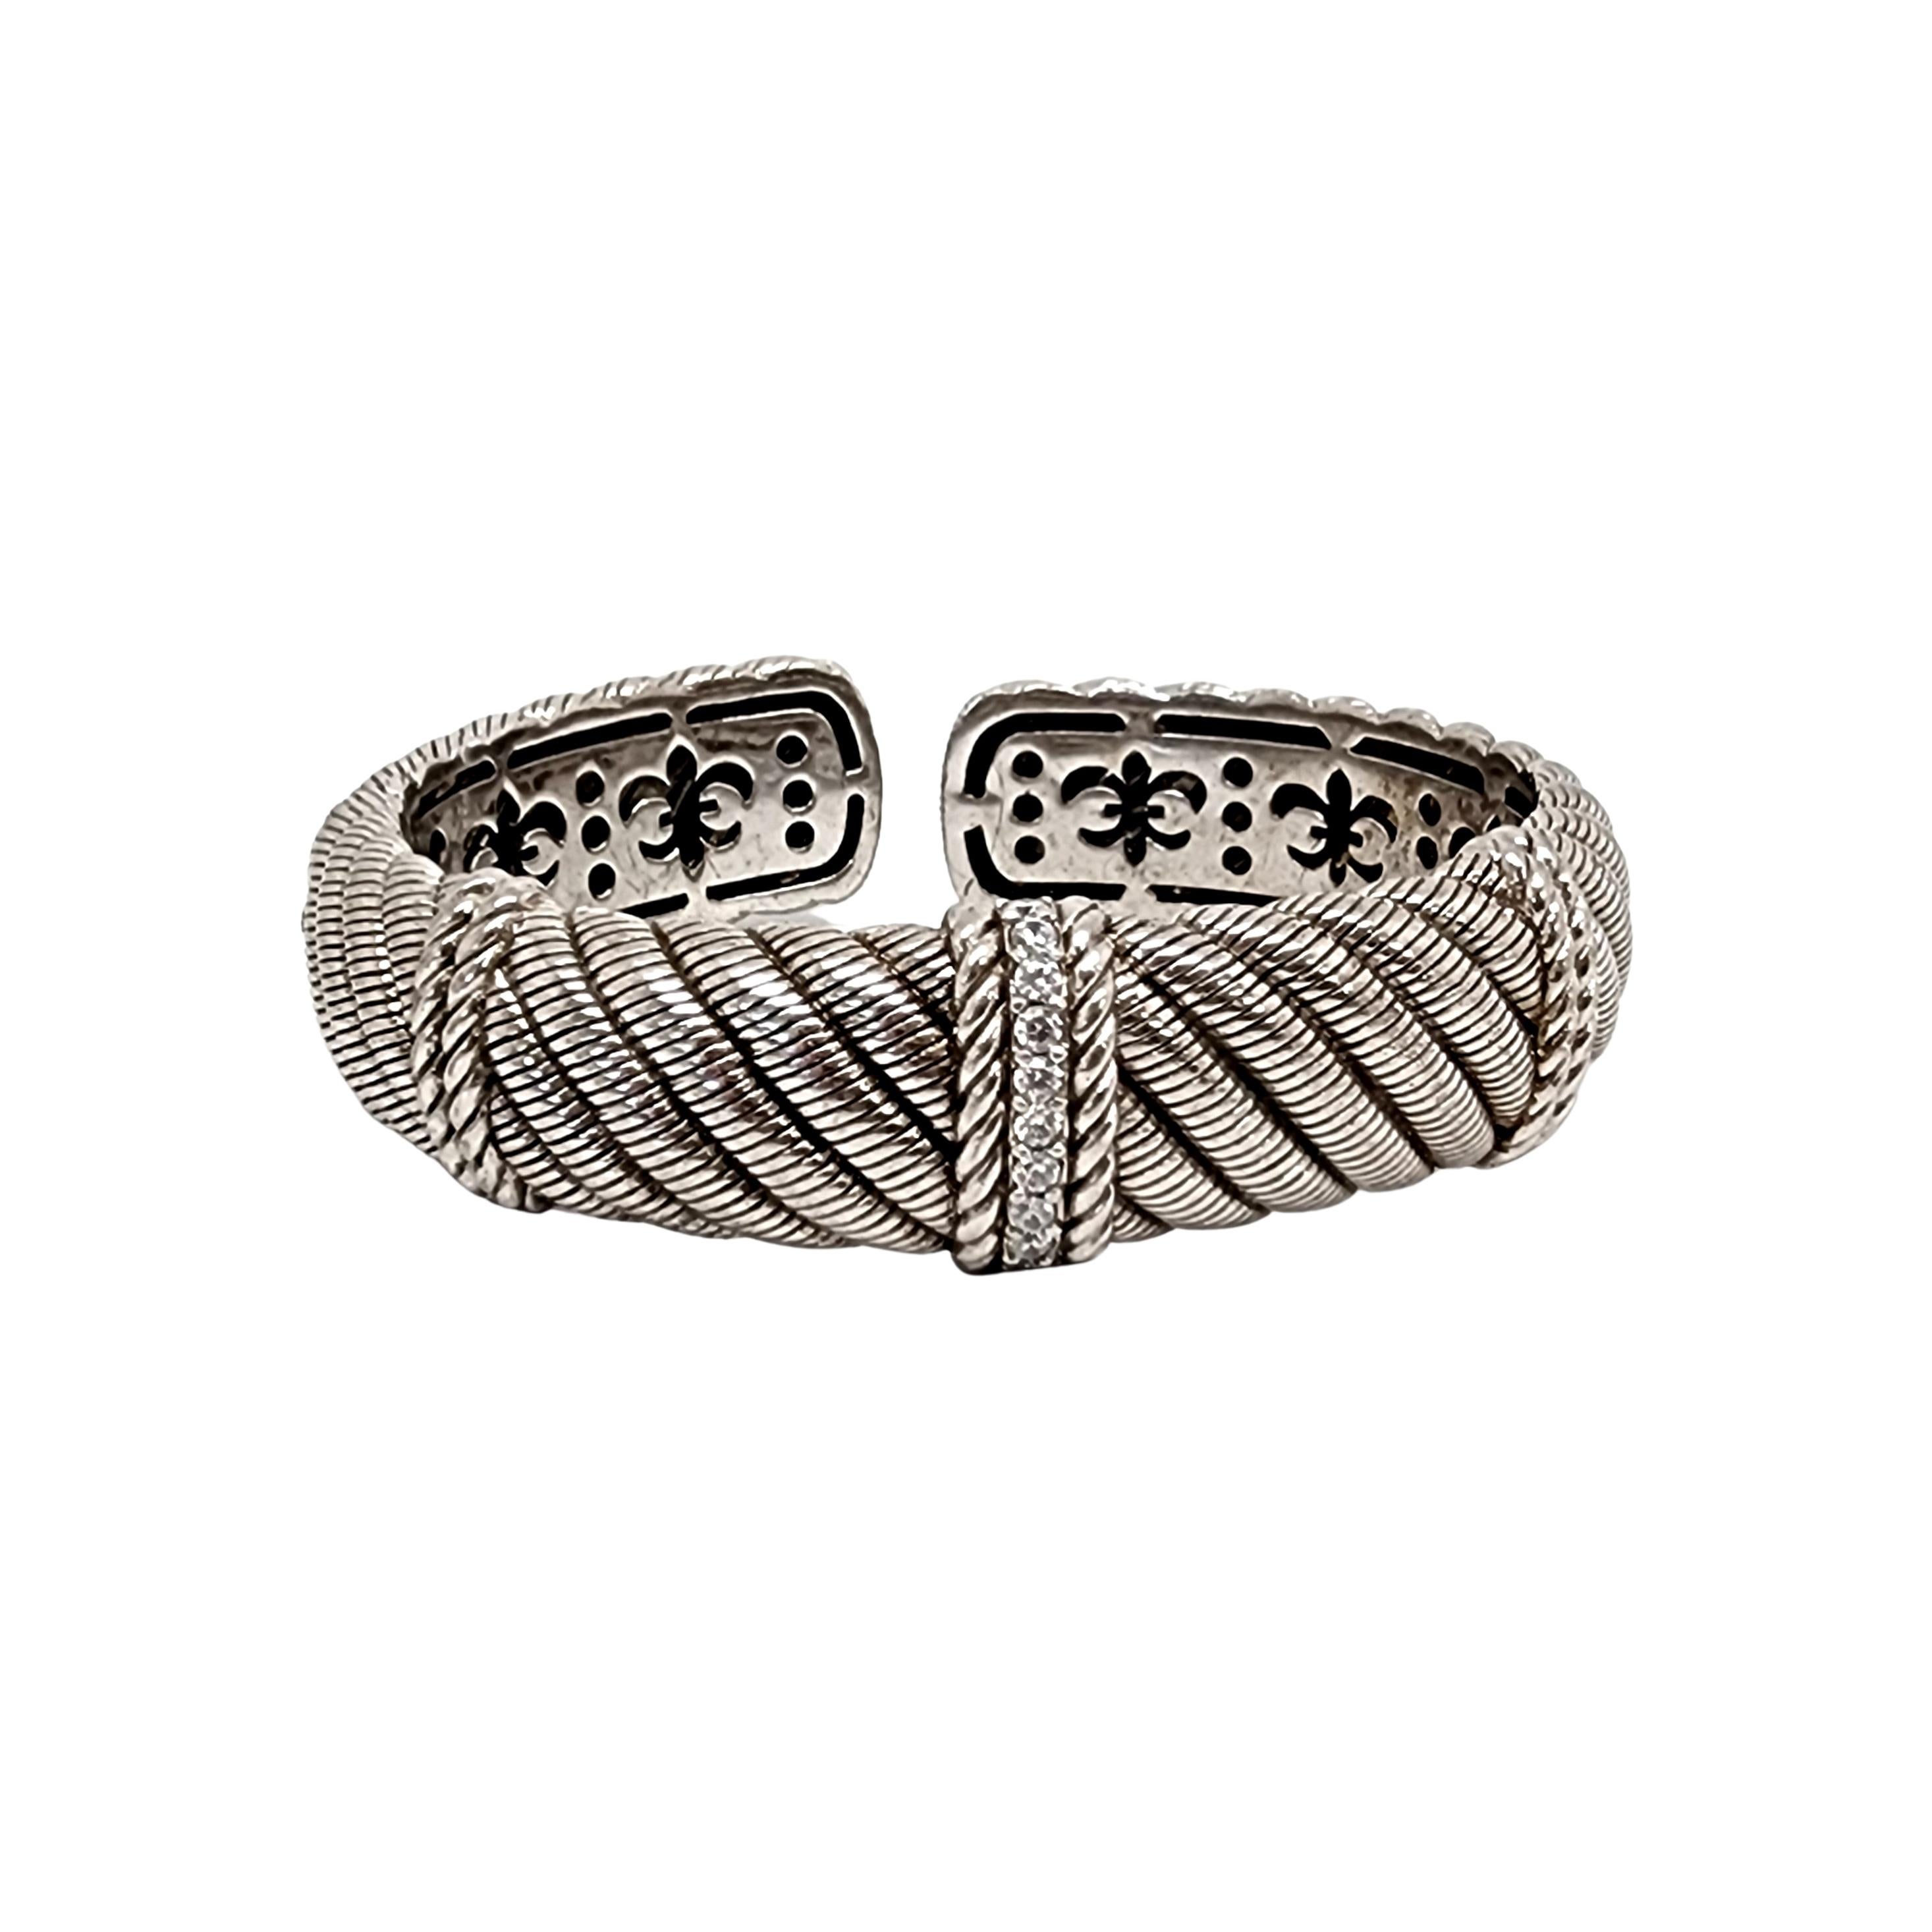 Sterling silver and CZ Diamonique wide cable twist hinged cuff bracelet by Judith Ripka

Designer piece featuring a hinged opening, diagonal cable design and a row of small round faceted prong-set CZs  at the center.

Measures approx 7